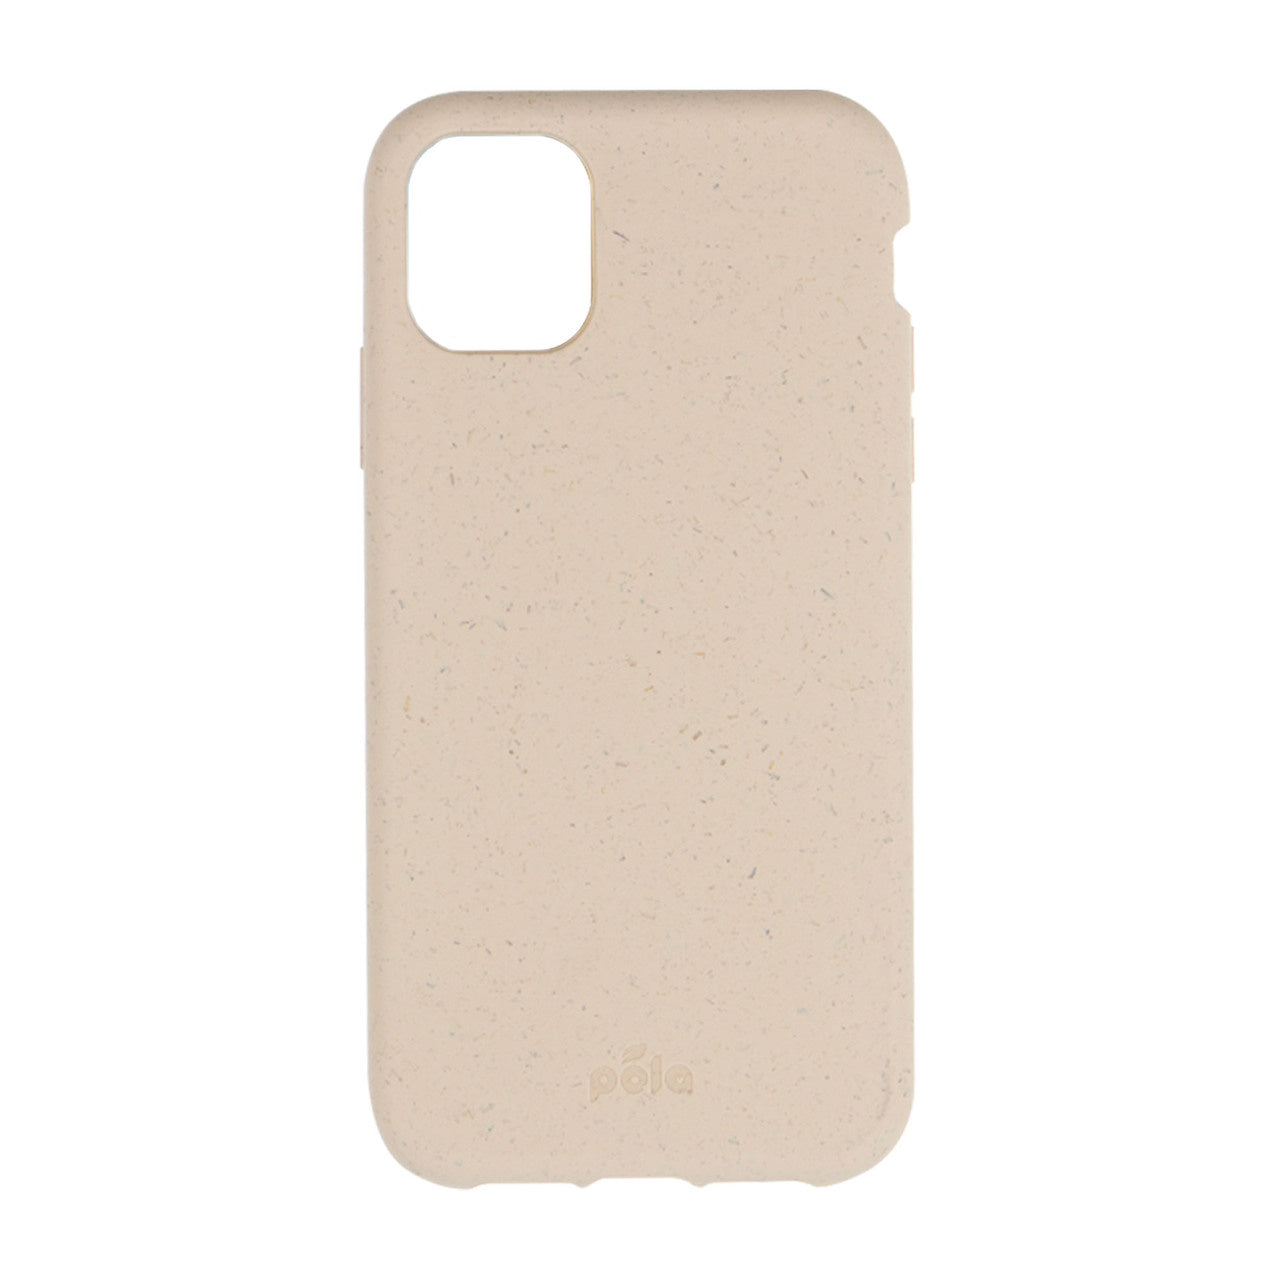 Pela iPhone 11 Pro Max Eco-Friendly Compostable Case - Pink Sea Shell